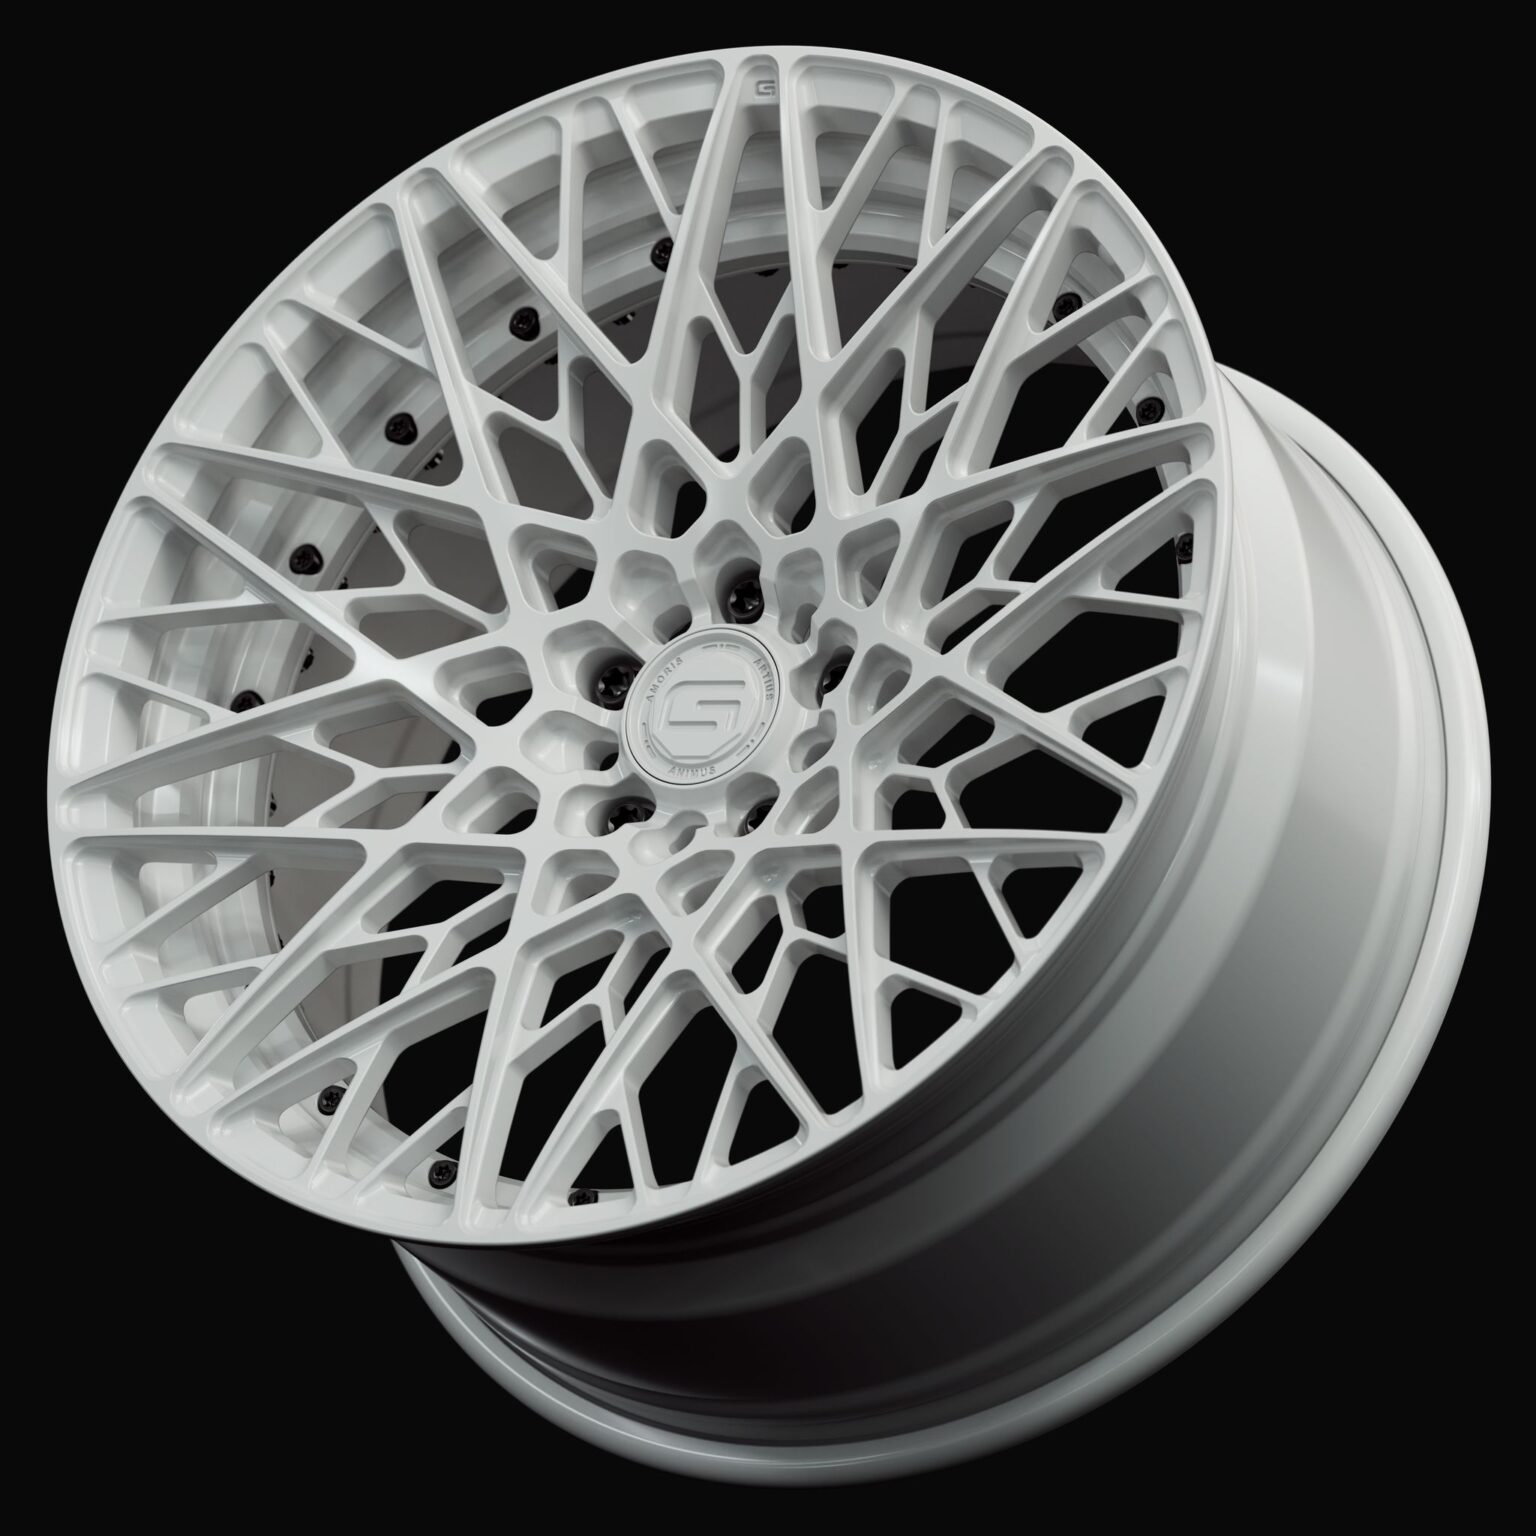 Three-quarter view of a white G55 duoblock wheel from Govad Forged Track series